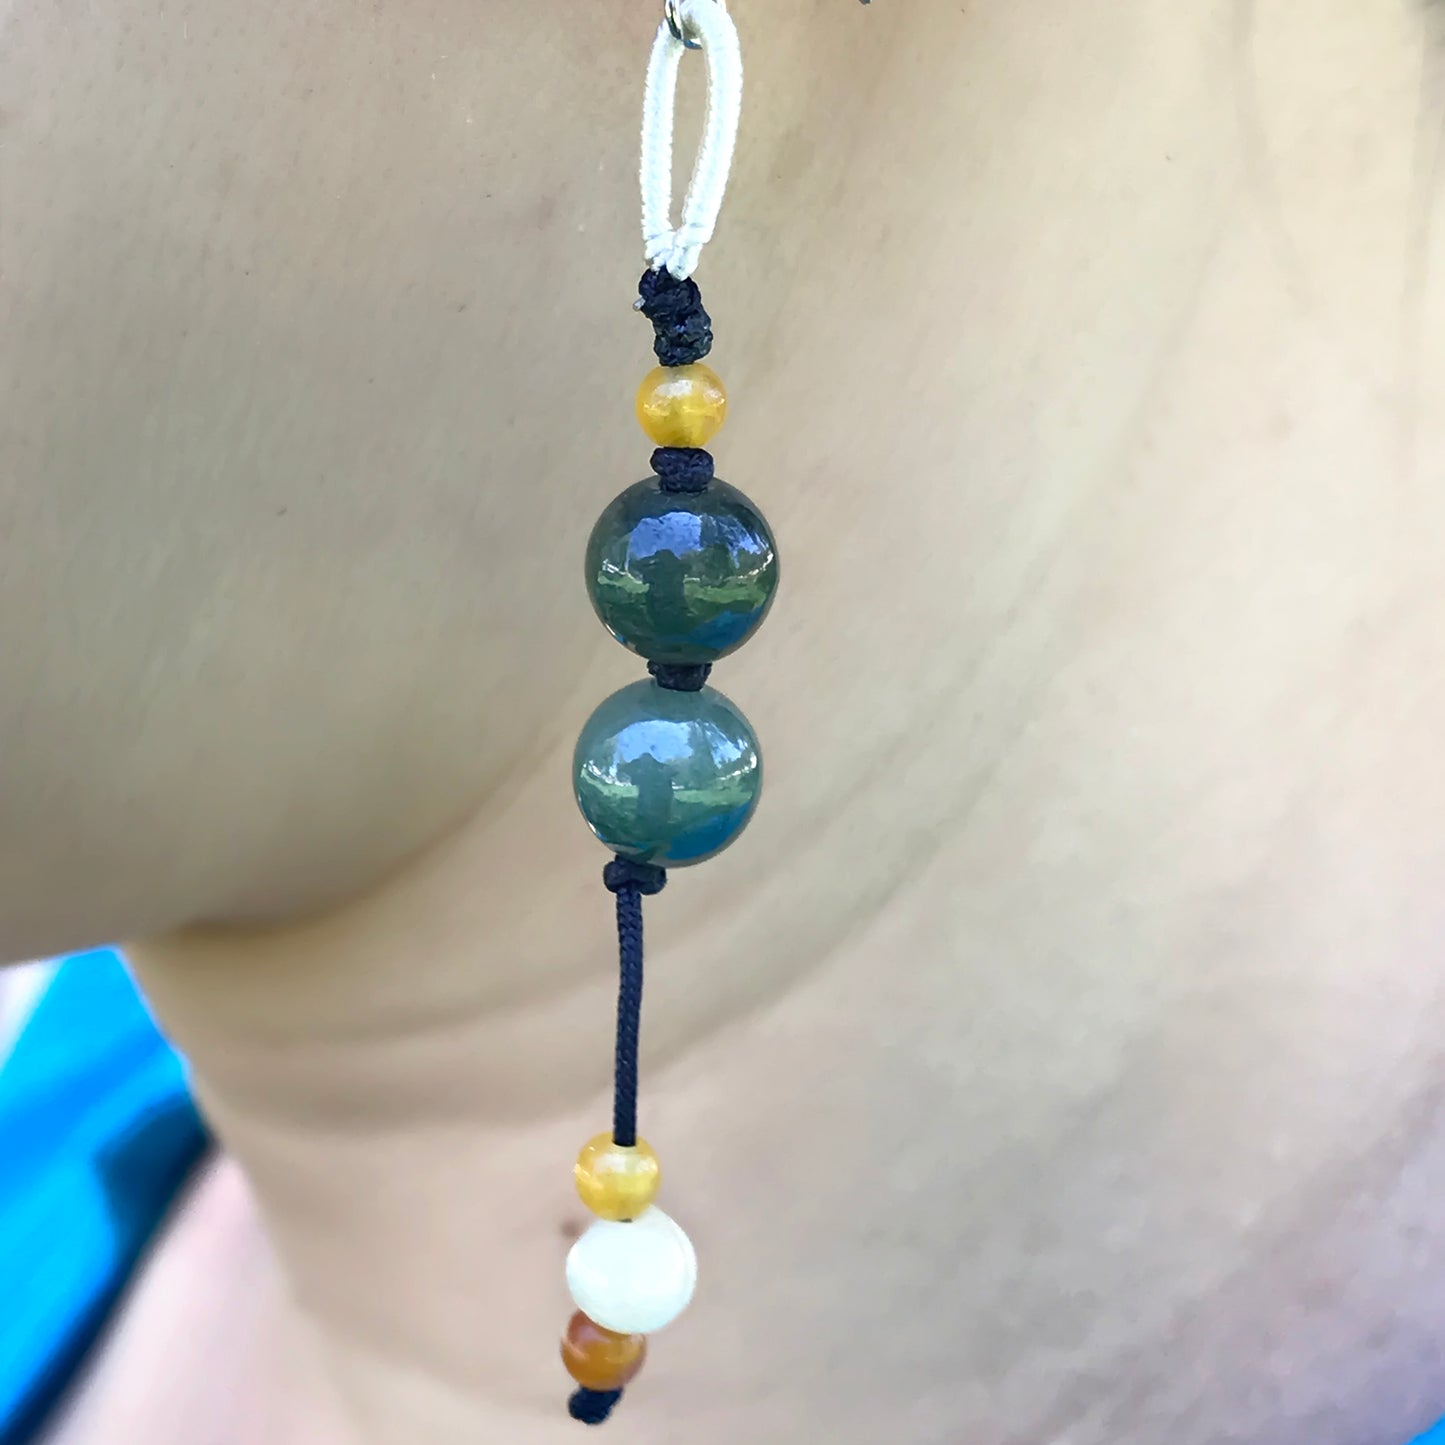 Make Every Look Unique with Eye-Catching Vibrant Jade Beads Earrings made with Black Cord